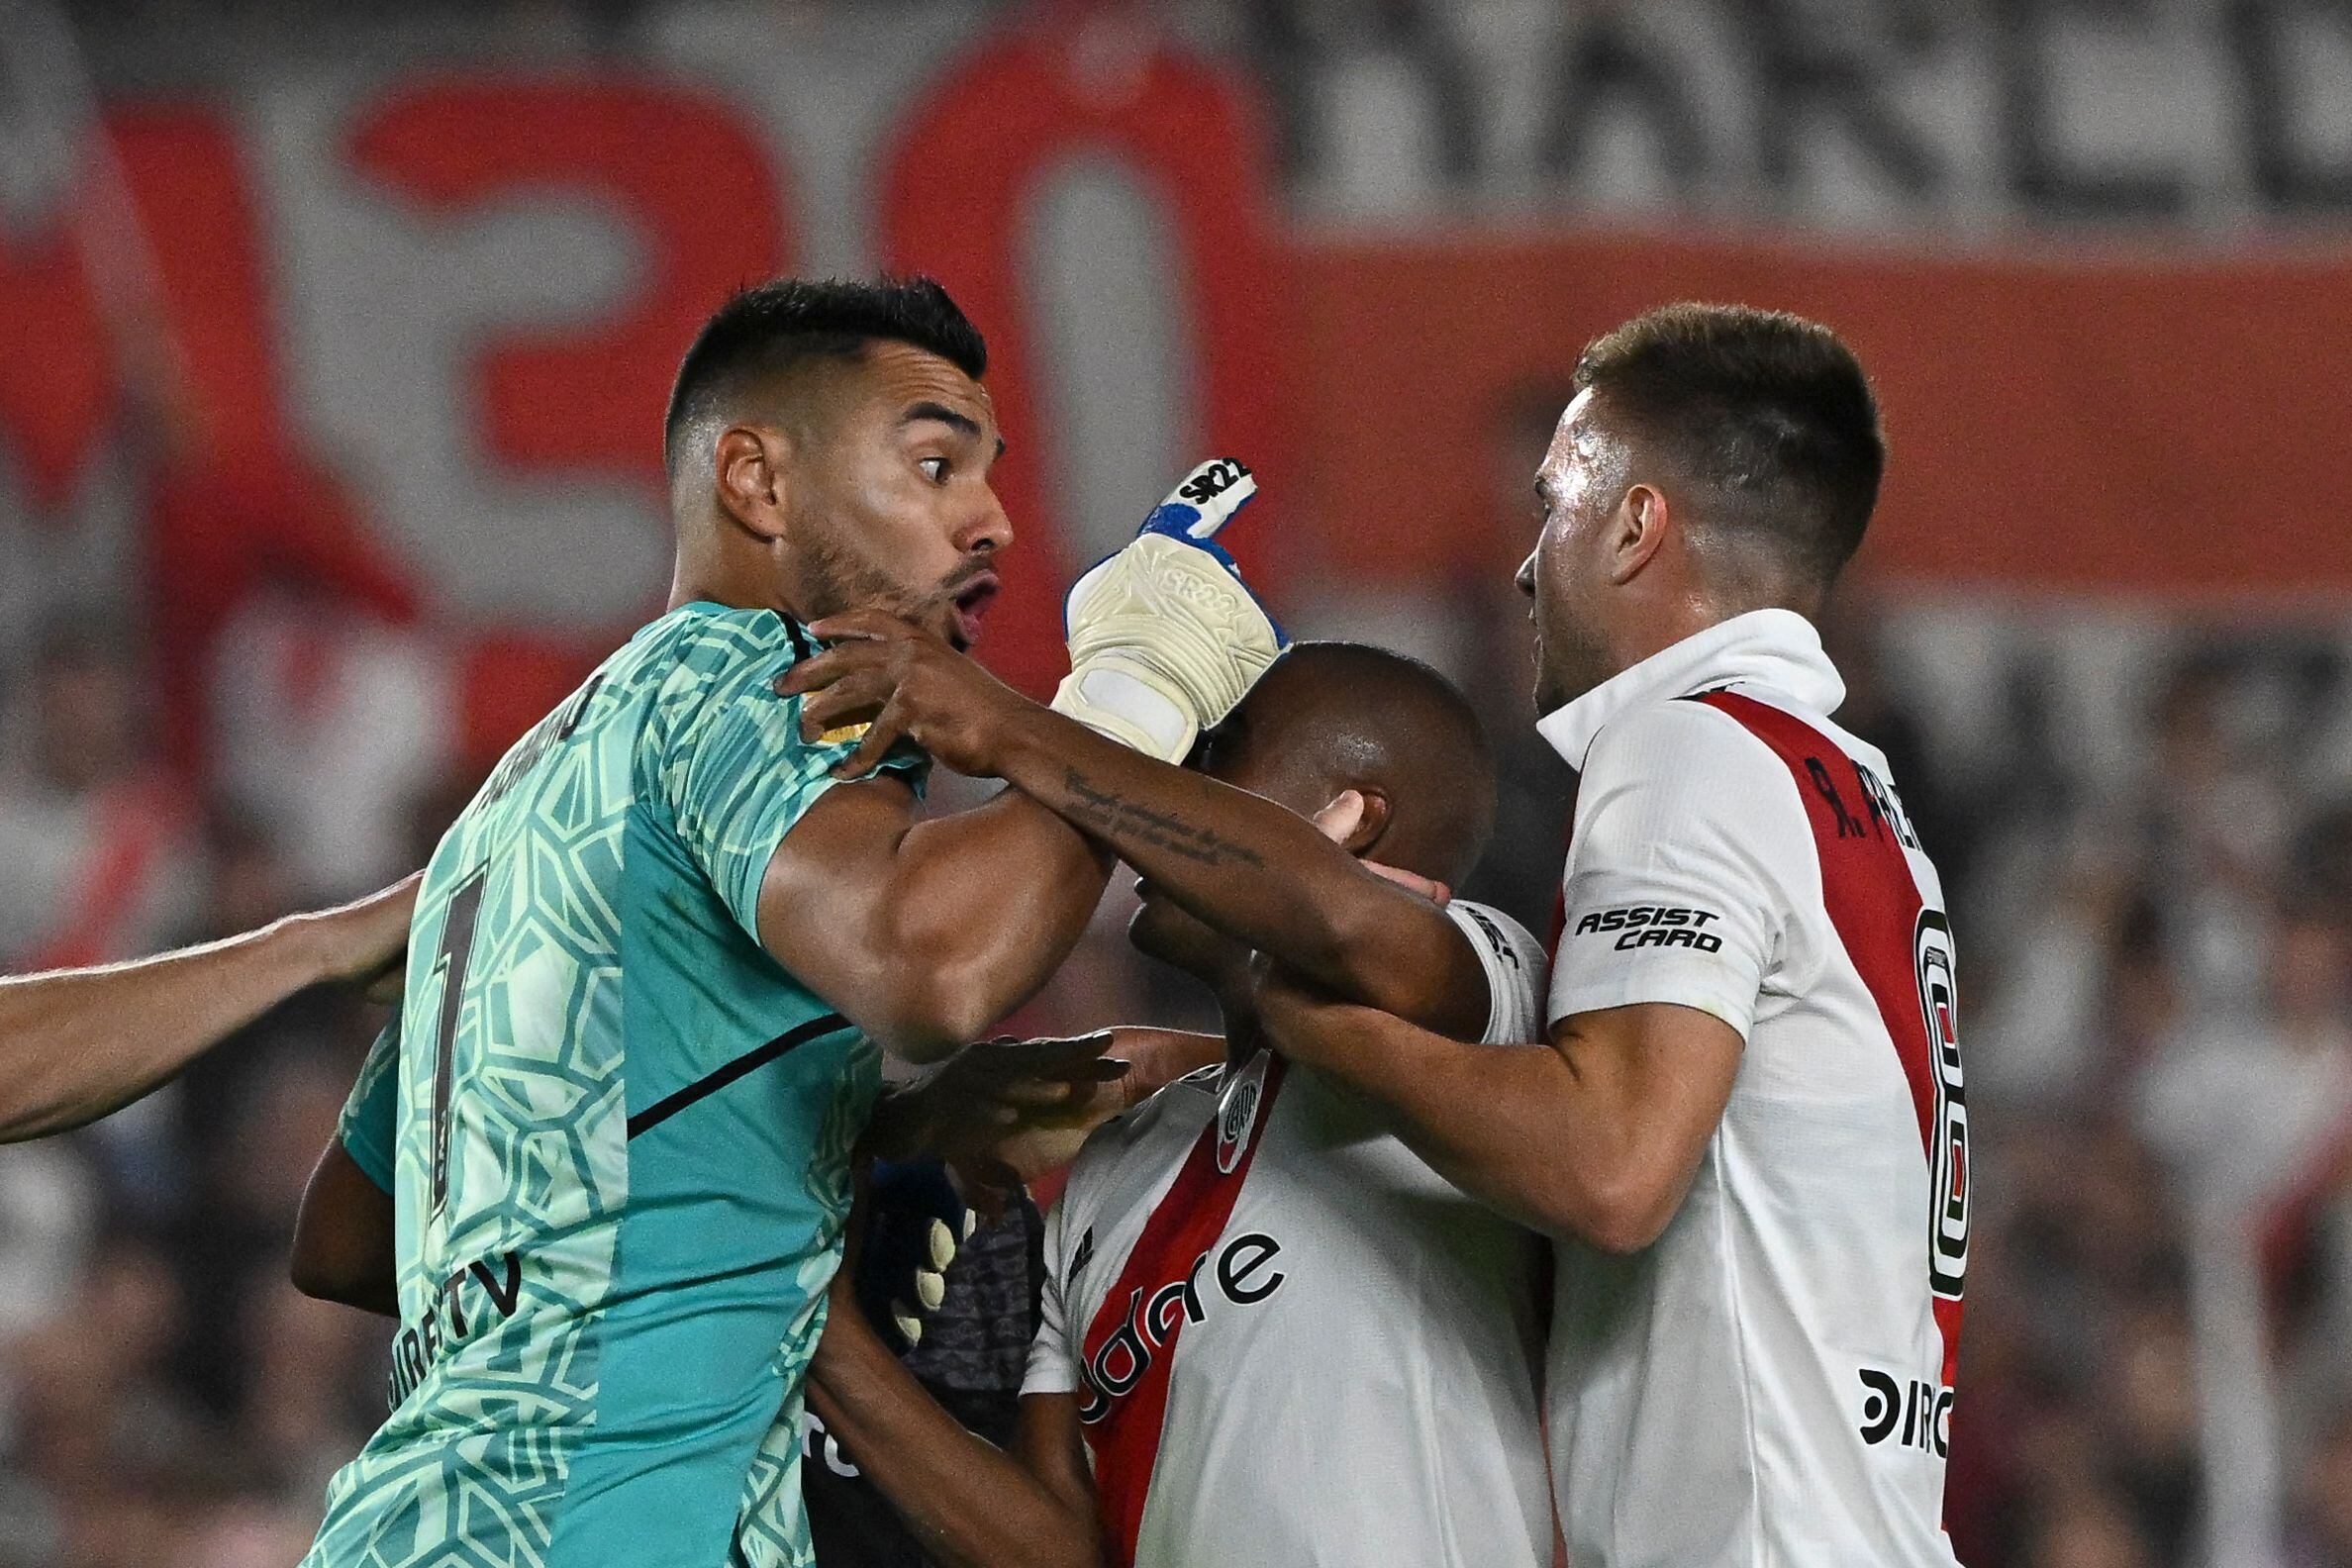 Boca Juniors' goalkeeper Sergio Romero (L) argues with River Plate's midfielder Agustin Palavecino (R) and midfielder Nicolas De La Cruz (C) after incidents following River Plate's penalty goal during their Argentine Professional Football League Tournament 2023 match at El Monumental stadium in Buenos Aires on May 7, 2023. (Photo by Luis ROBAYO / AFP)